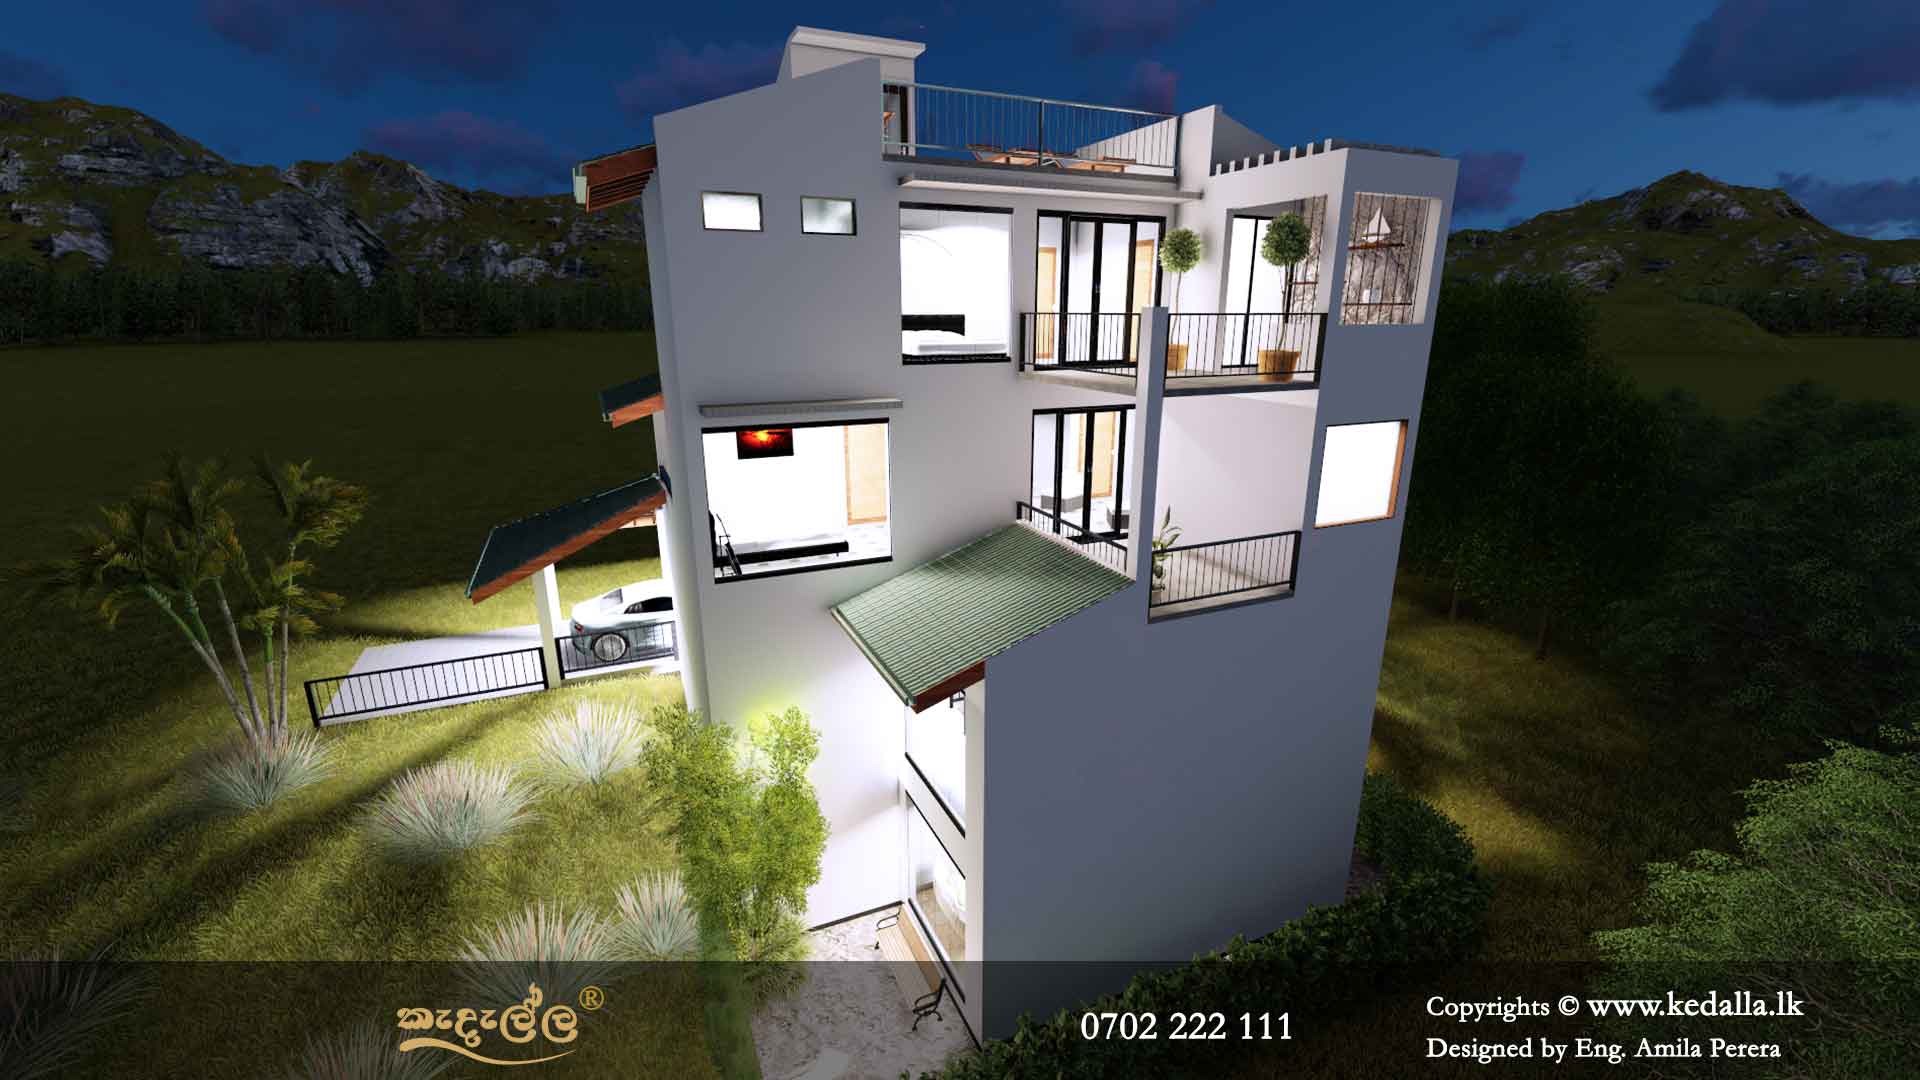 Luxury 3 bedroom three story house plans with plenty of open space and room for entertaining